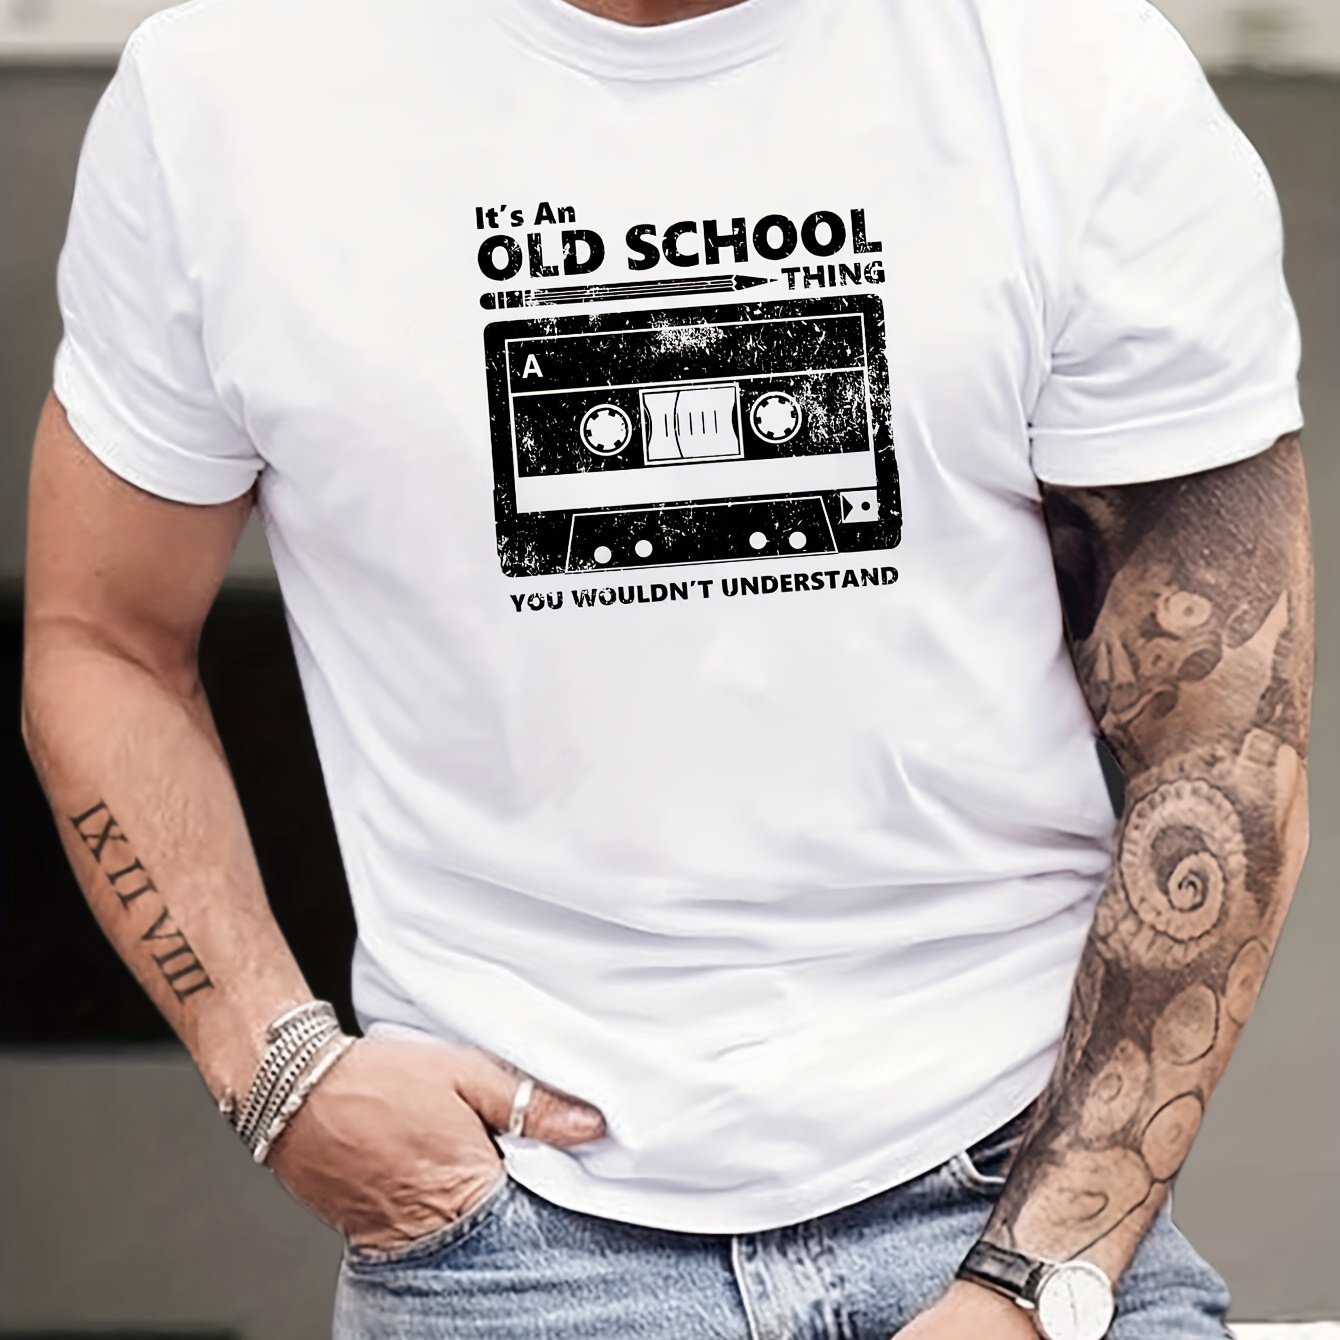 

Old School Tape Graphic Print Men's Creative Top, Casual Short Sleeve Crew Neck T-shirt, Men's Clothing For Summer Outdoor